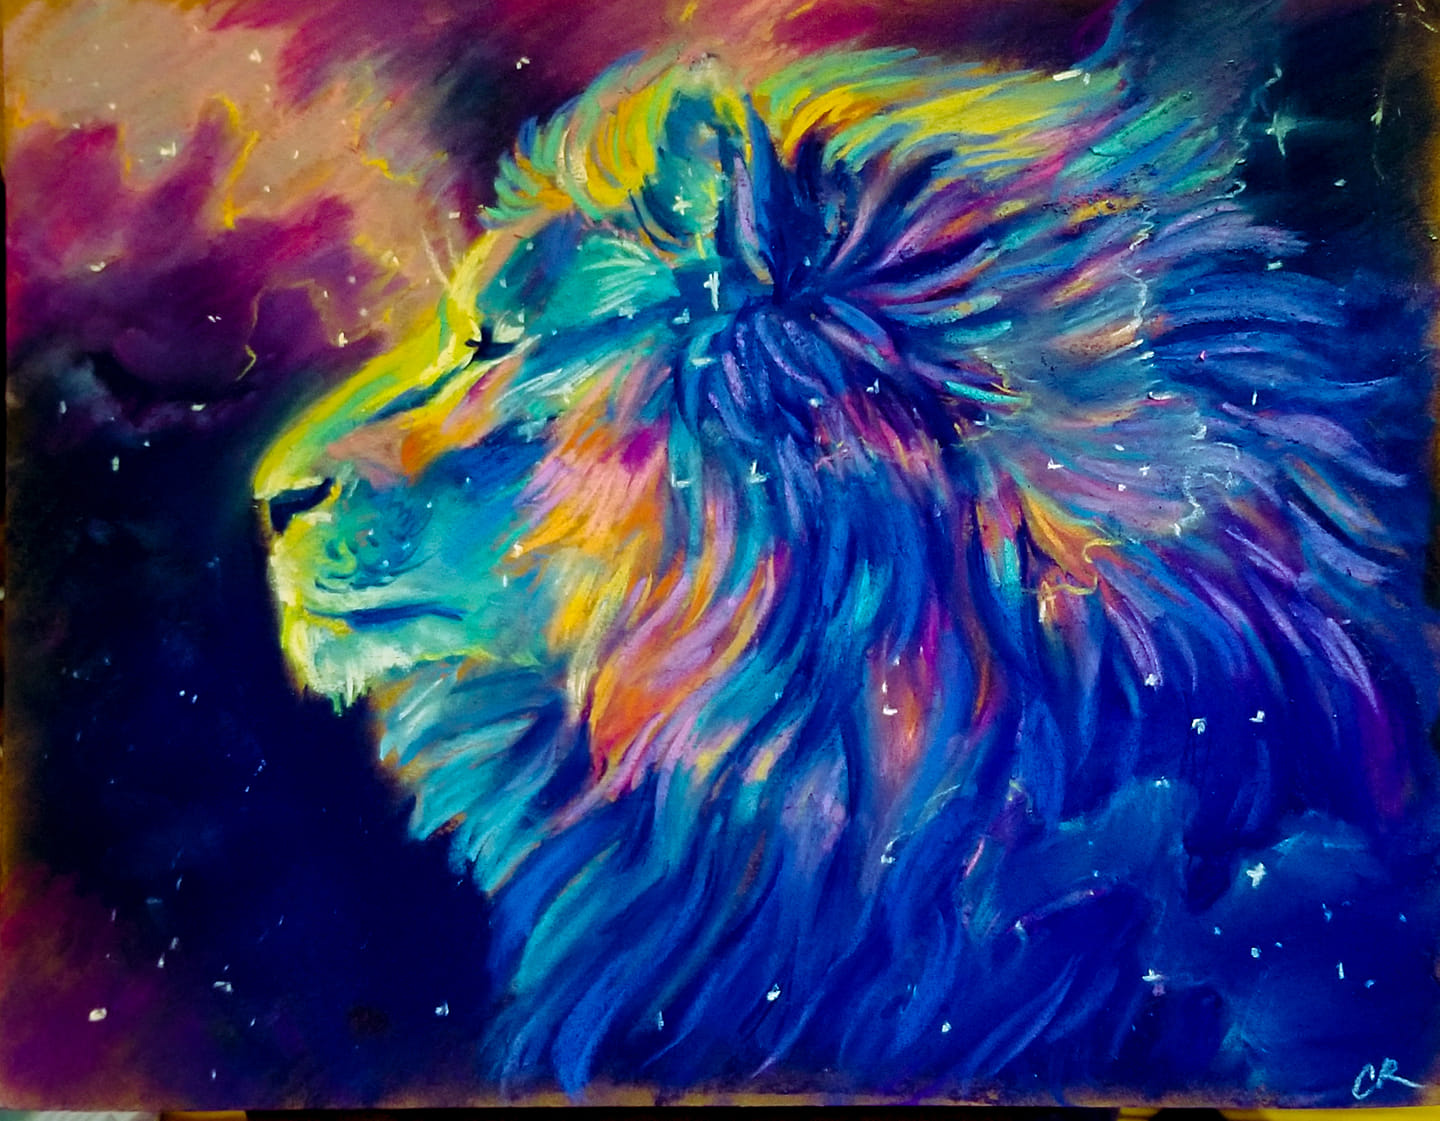 A pastel drawing of a mystical celestial portrait of a male lion with glowing mane in rainbow colors, the background is deep cosmic blue and purple, the face is lighter shades of blue, neon green and yellow, with orange and pink strokes in the mane